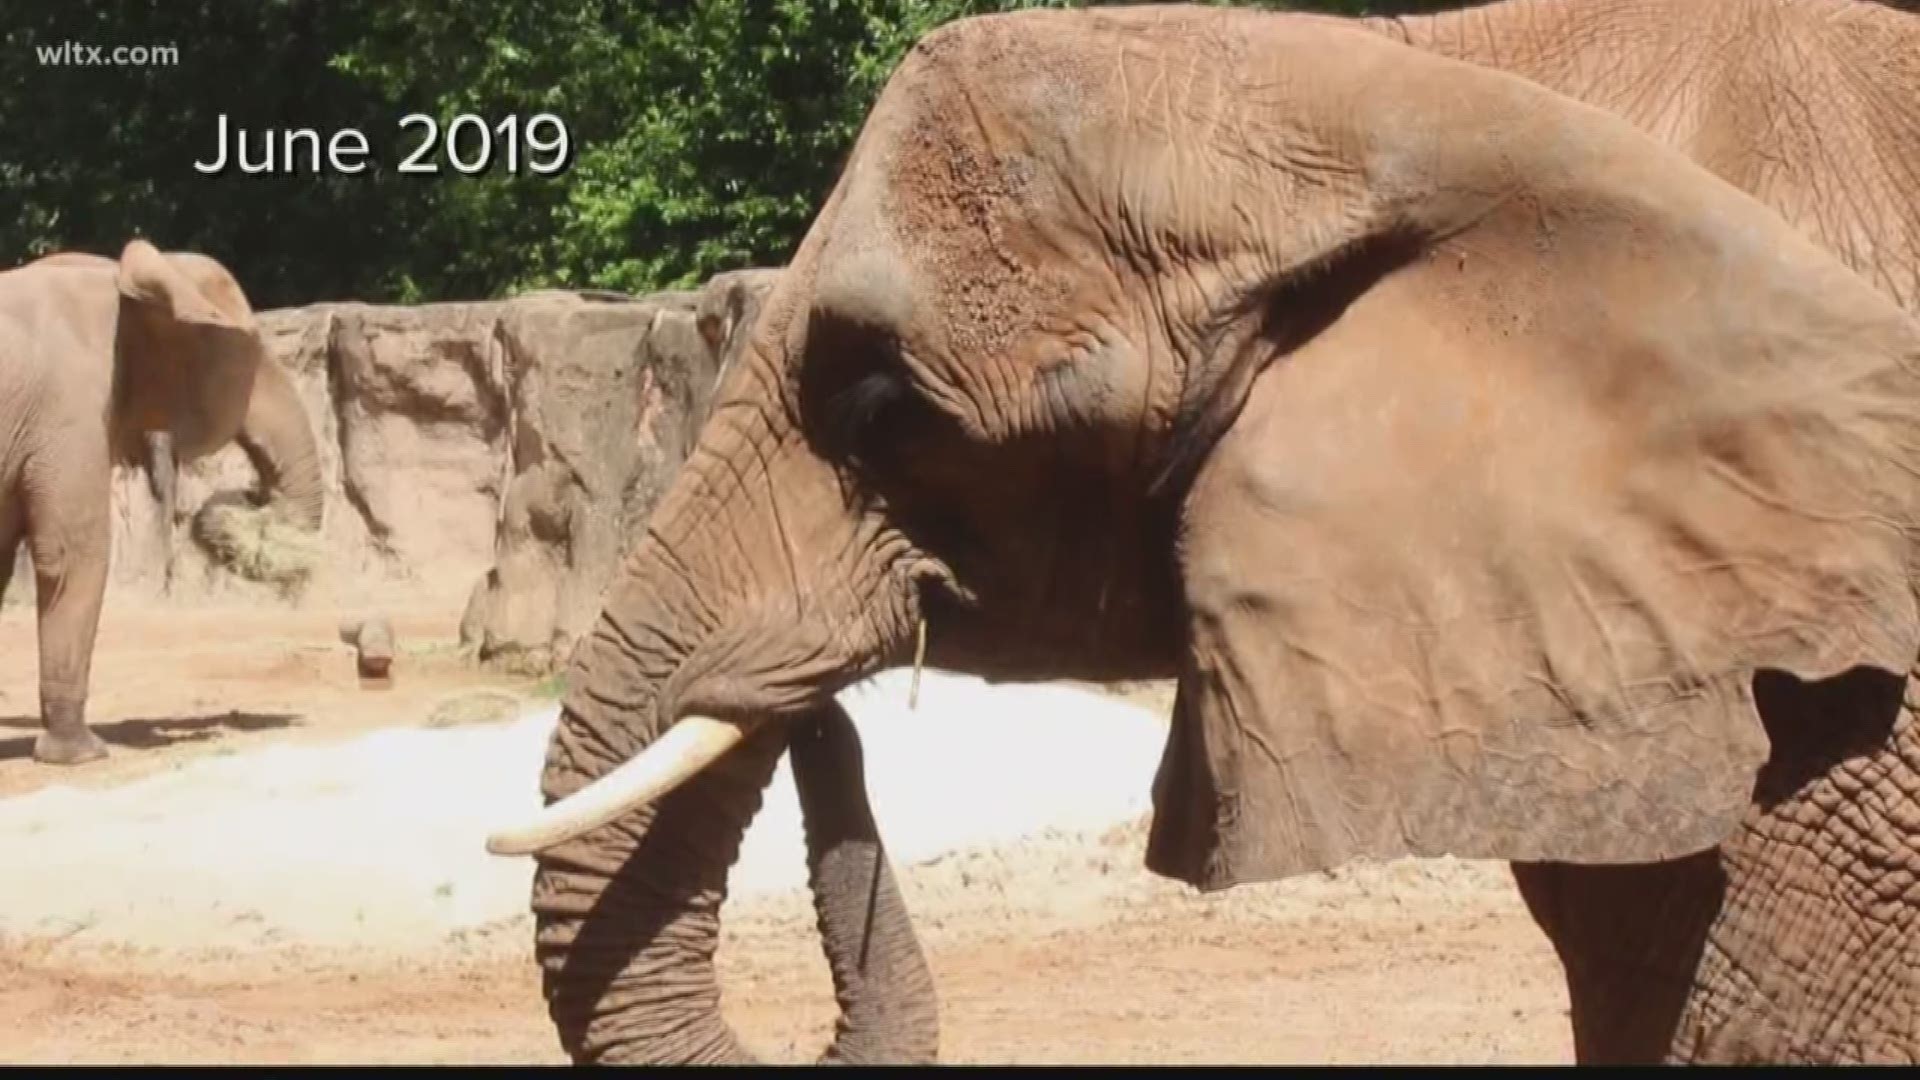 In June, it was announced that Robin and another elephant, Belle, would be leaving the zoo to find them a new herd, and to make room for a new rhino exhibit.